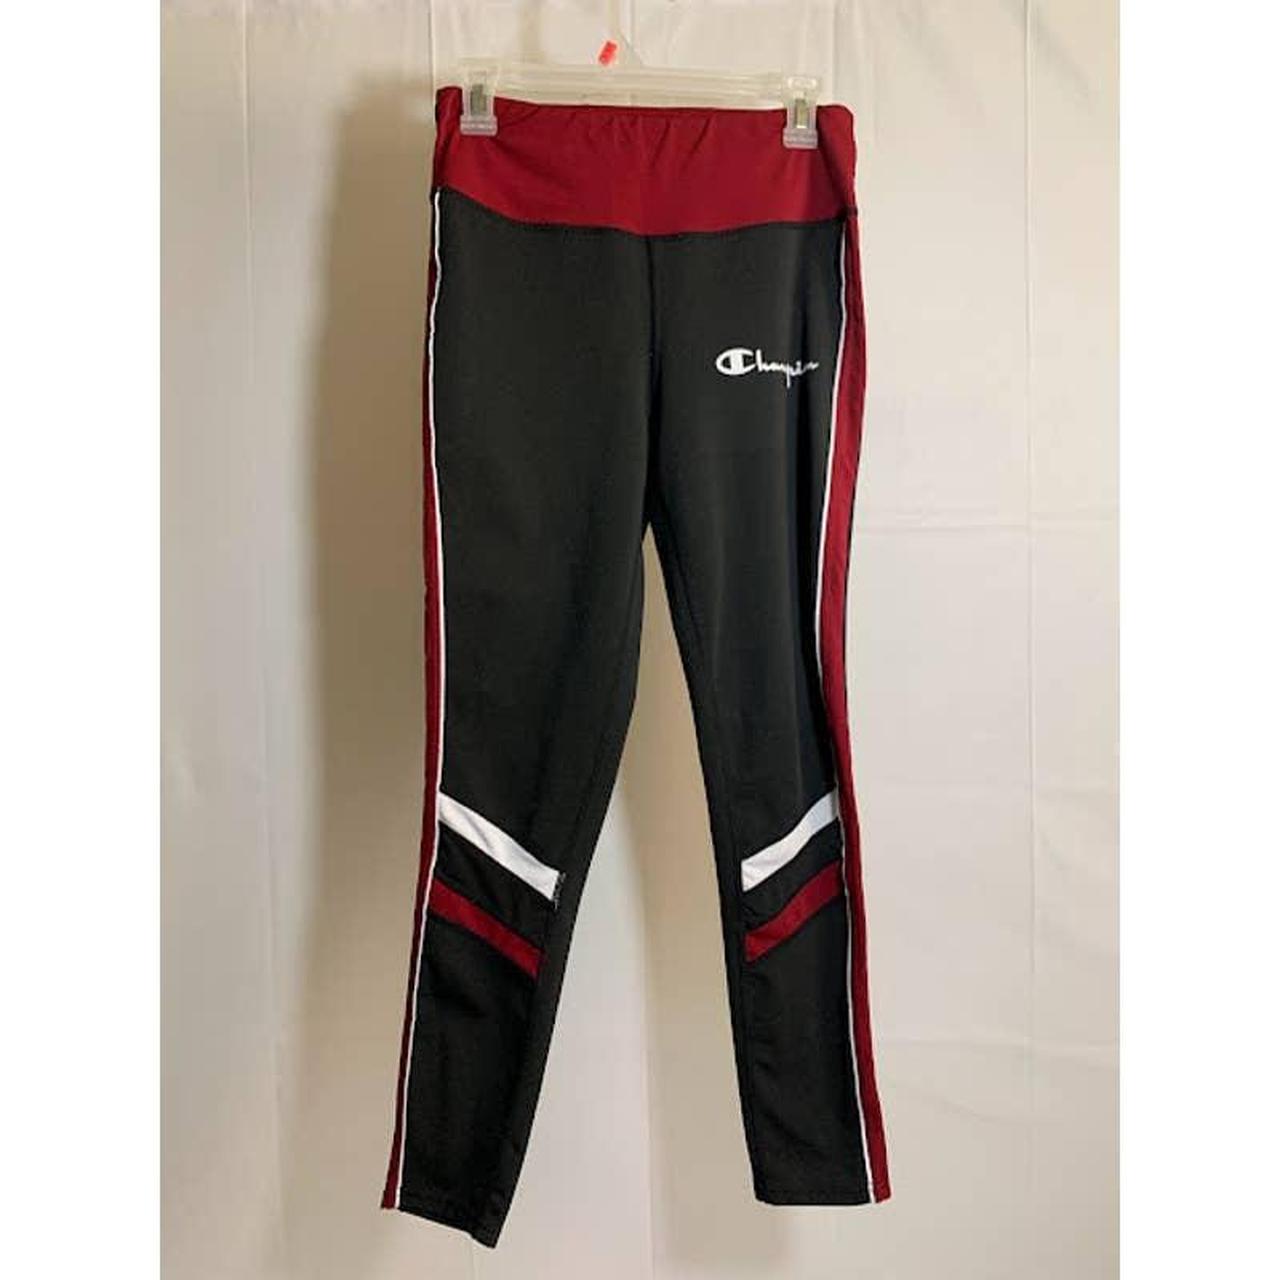 Champion Women's Leggings size xl Red and black in - Depop